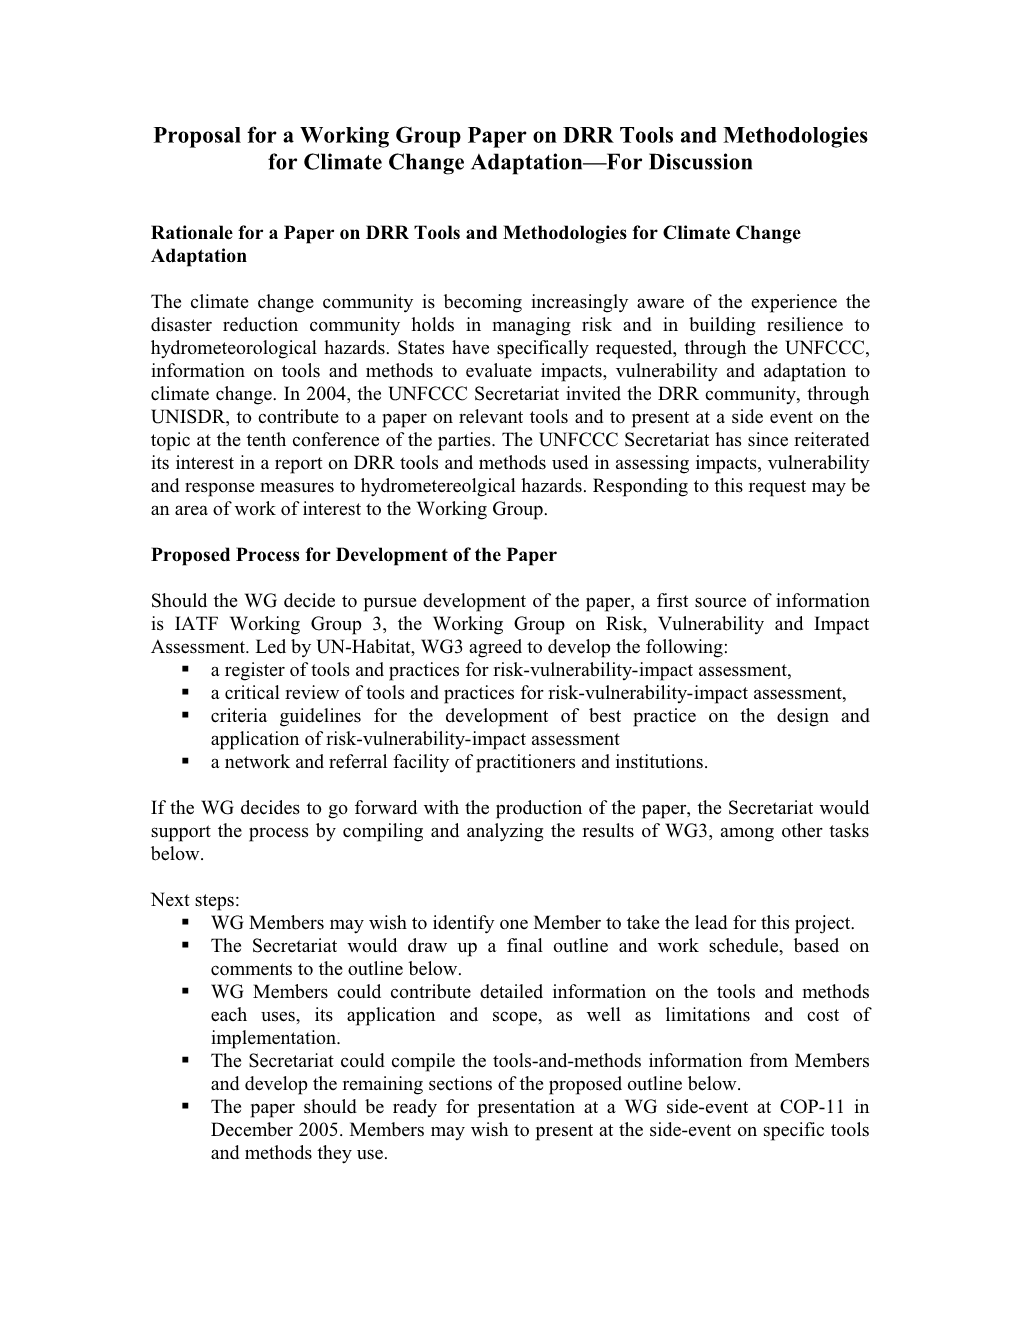 Proposal for a Paper on DRR Tools for Climate Change Adaptation